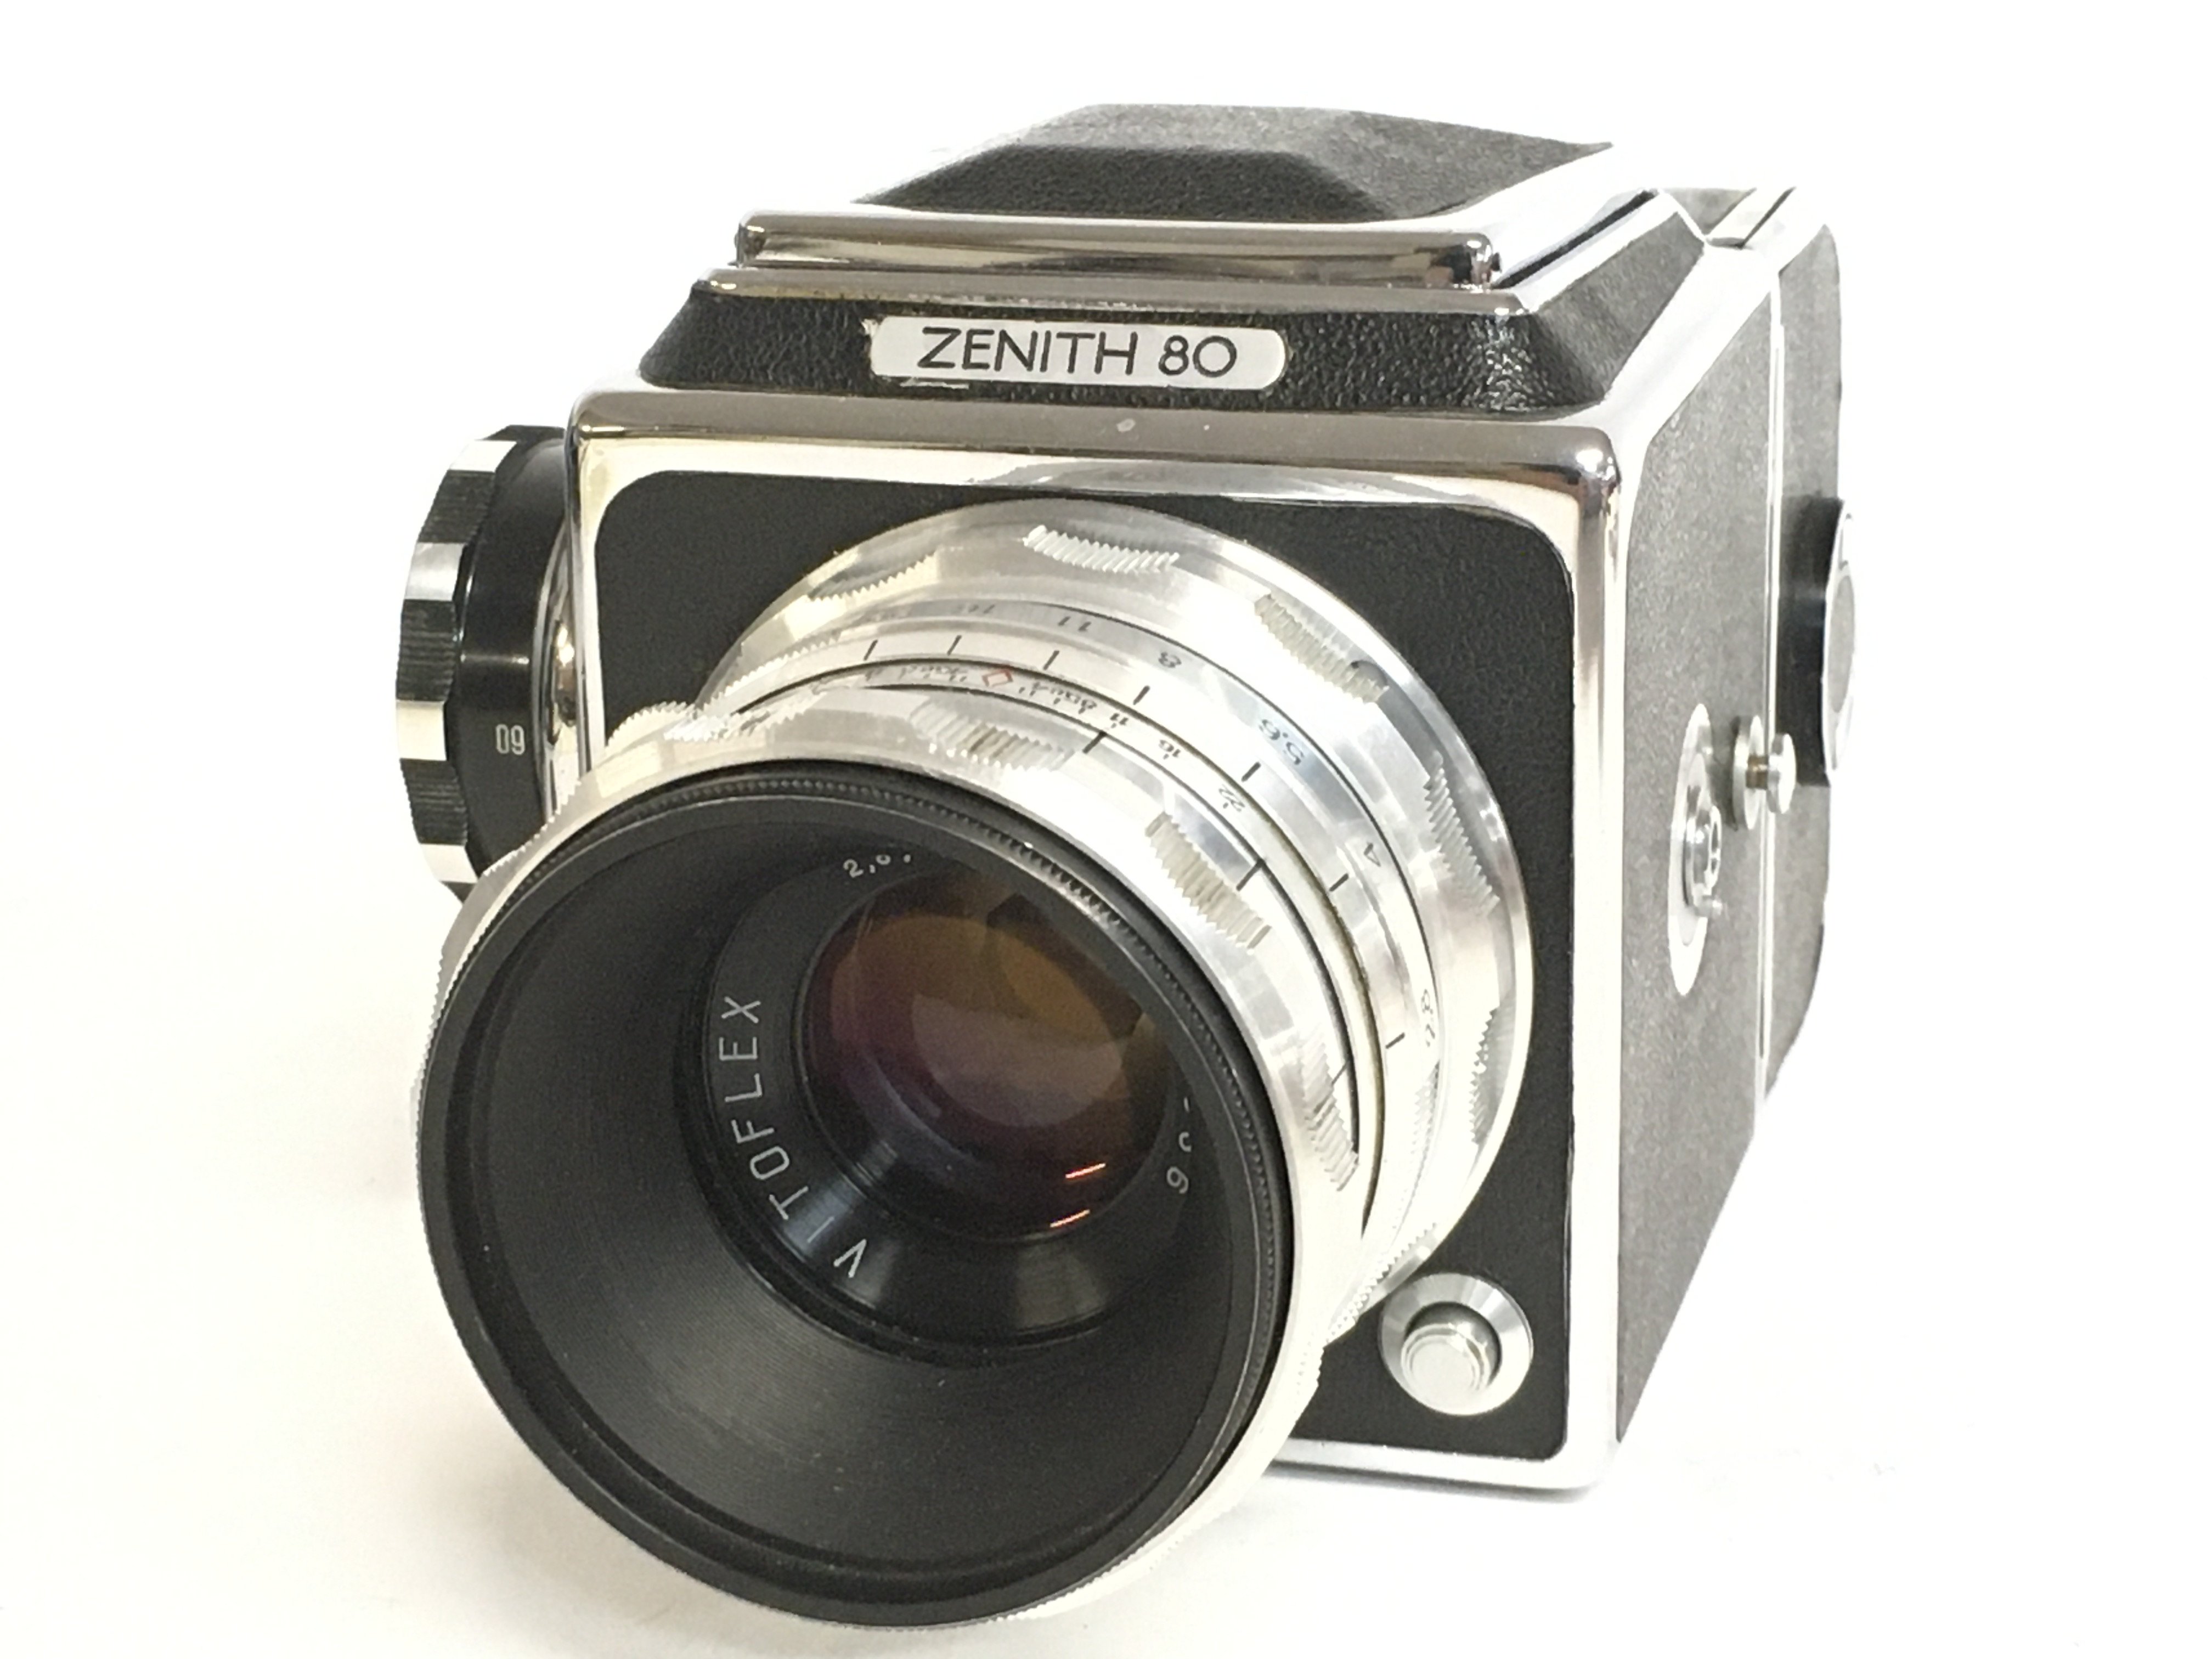 A vintage Zenith 80 camera. This lot cannot be pos